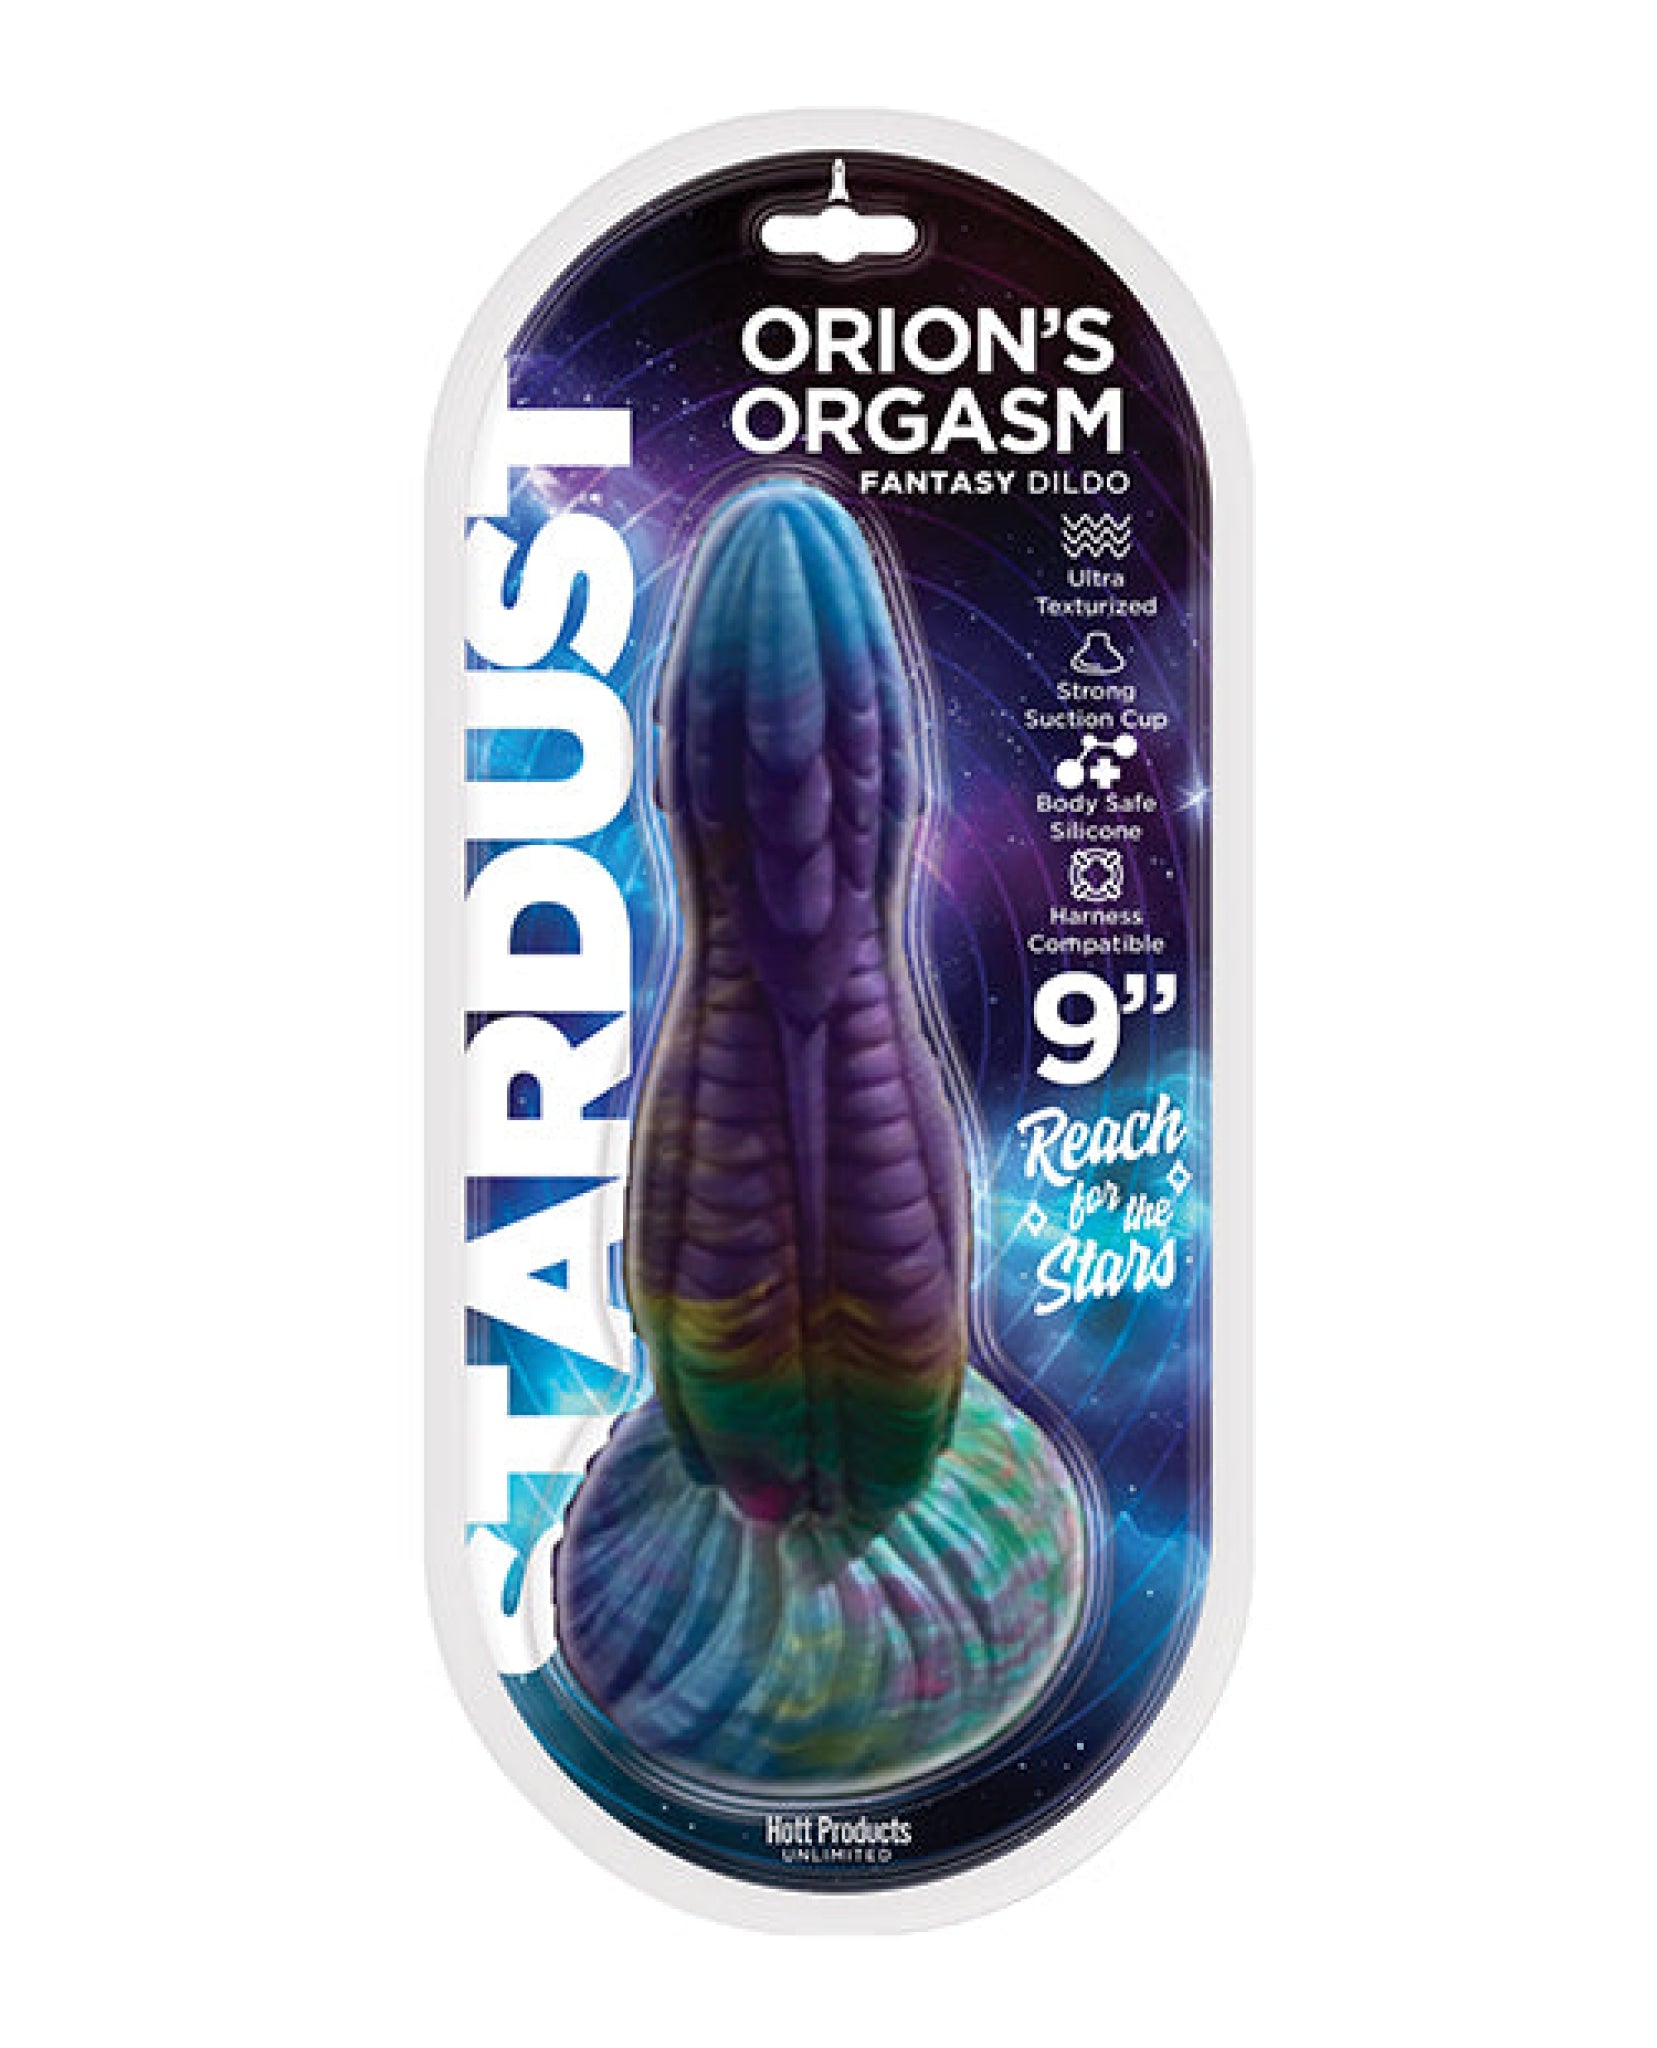 Stardust Orion's Orgasm 6" Dildo Hott Products